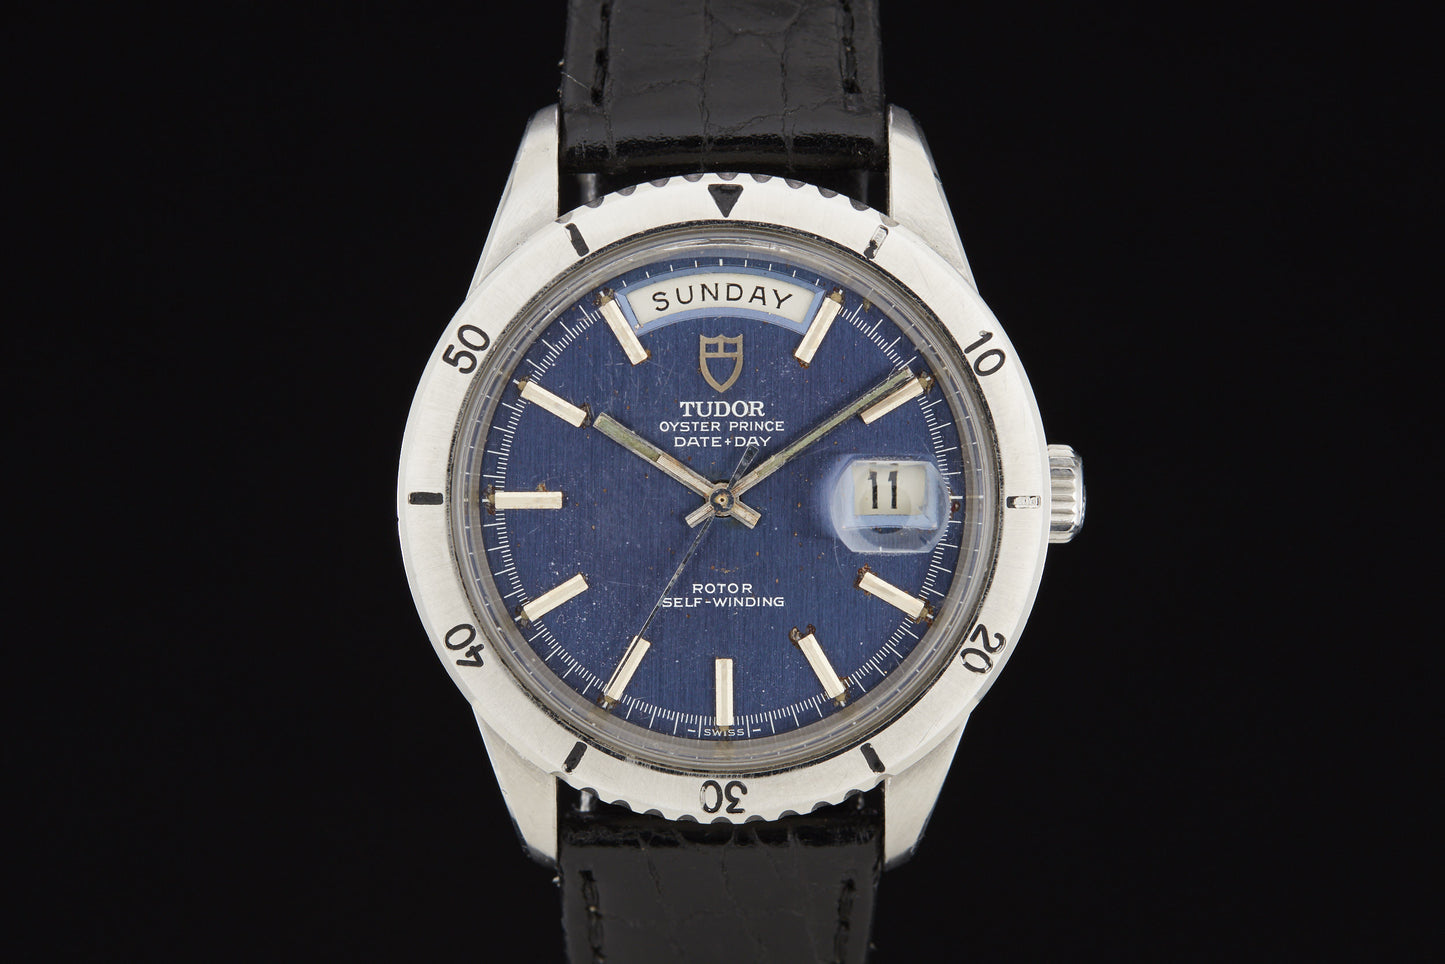 Tudor Oyster Prince Day-Date